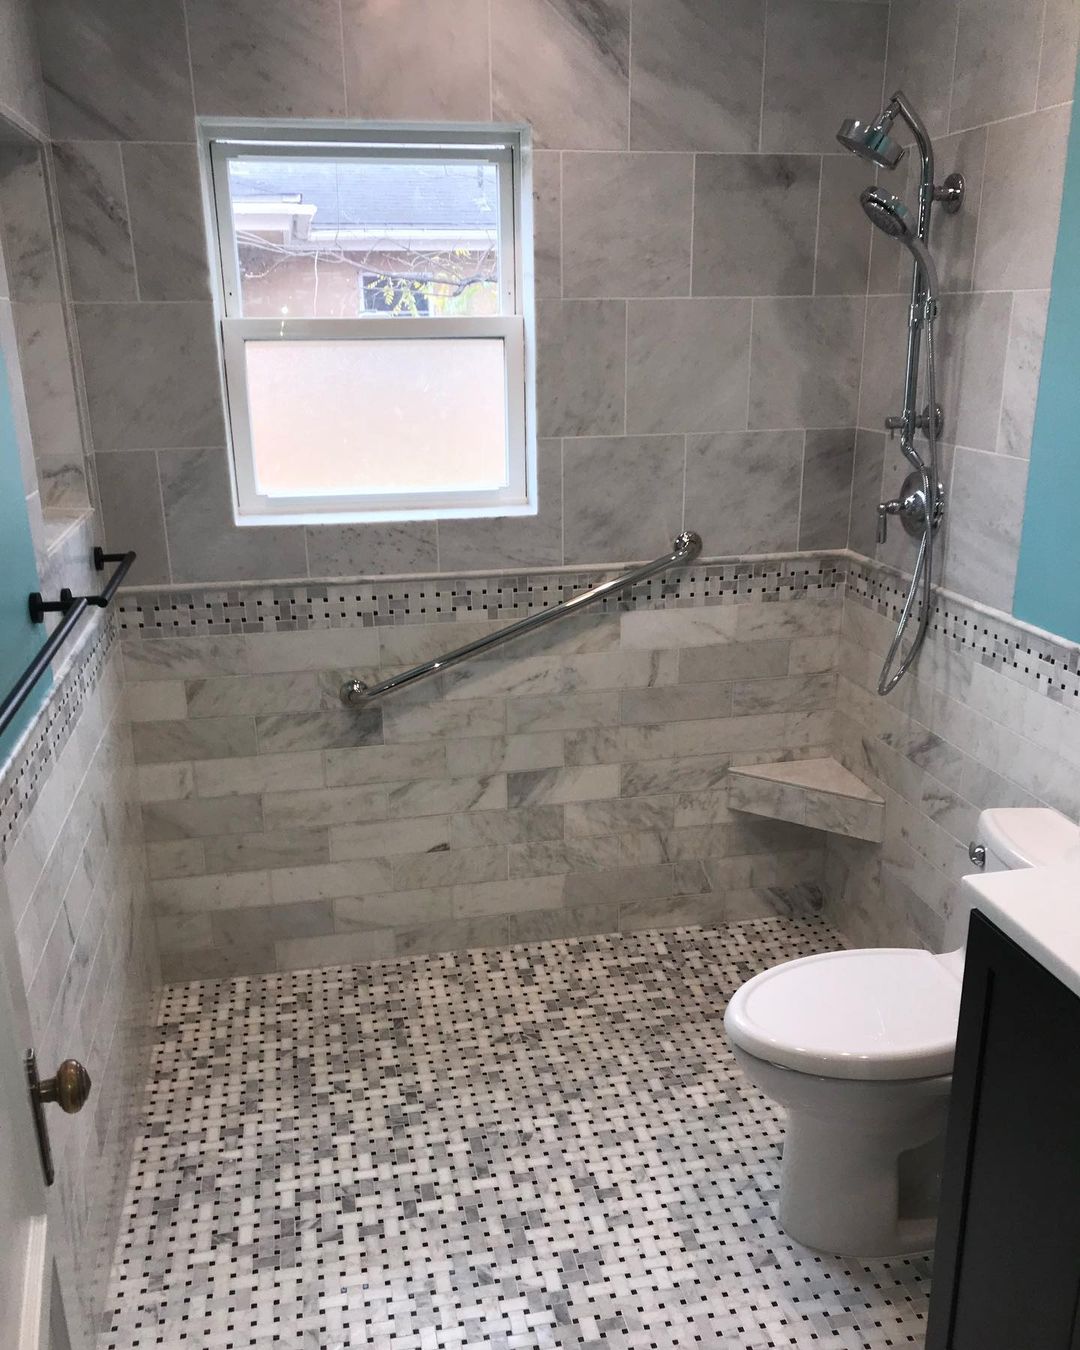 Interior view of accessible shower with modern tiles.